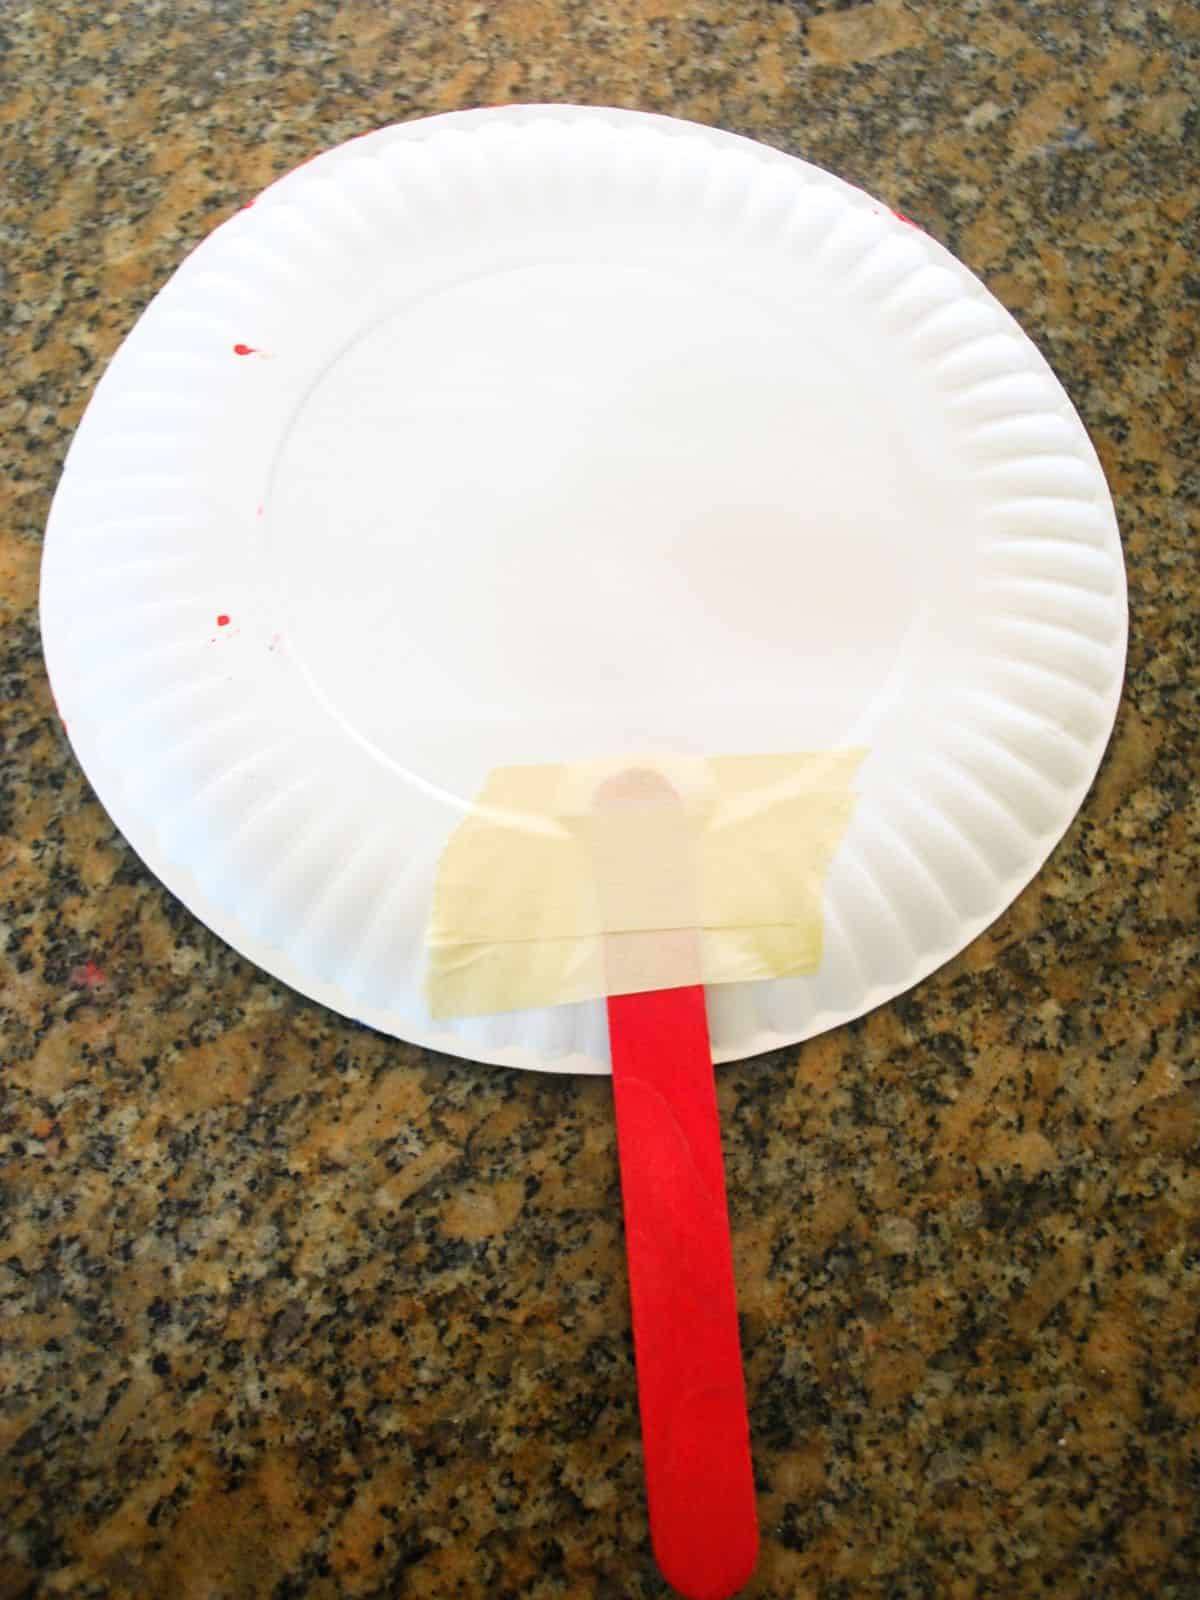 red popsicle stick taped to a white paper plate.